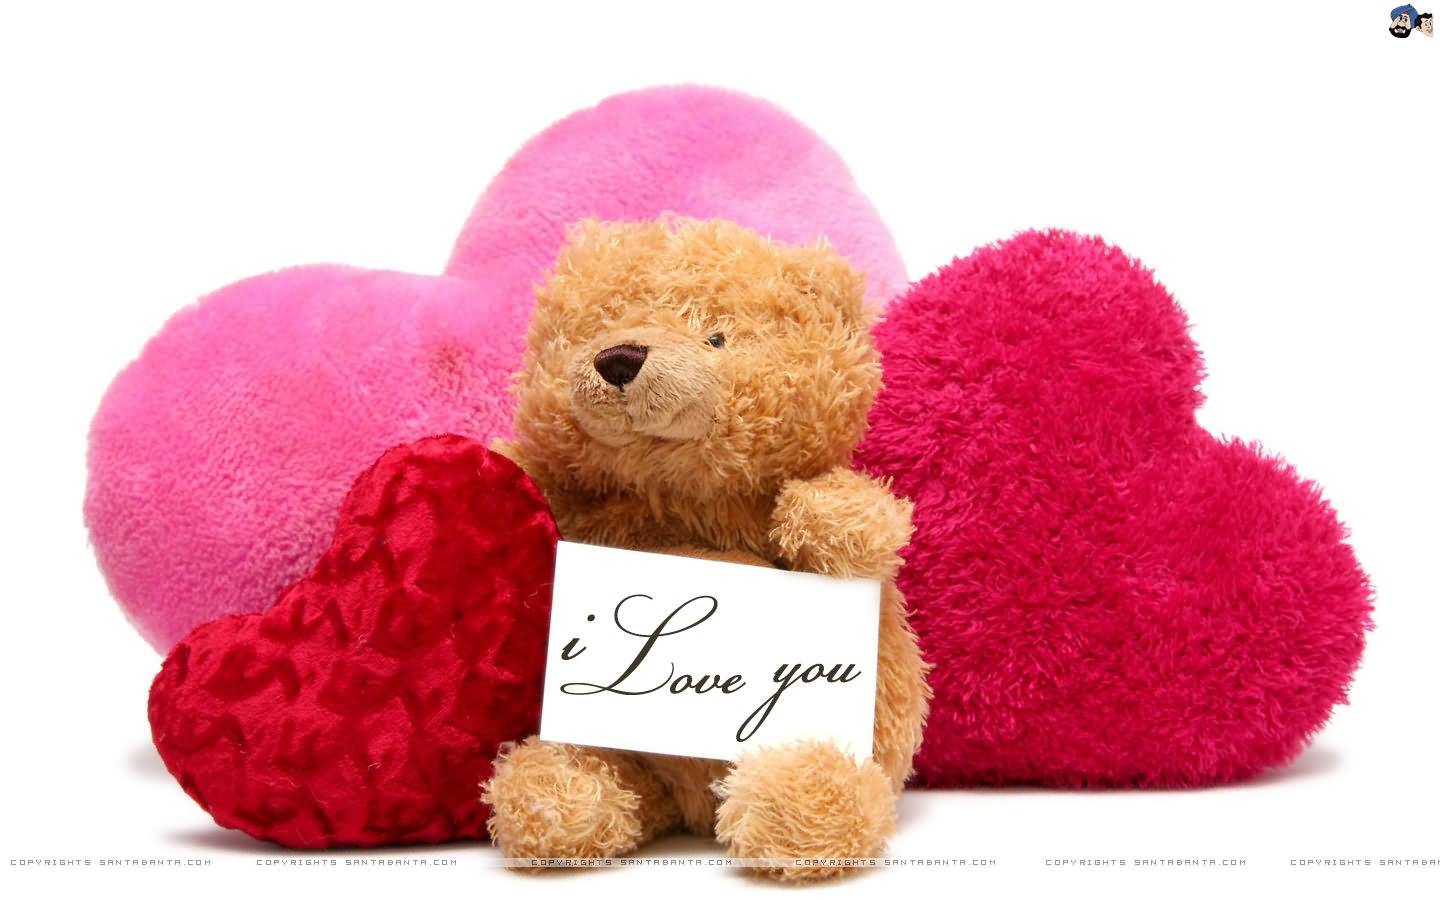 Happy Teddy Bear Day Messages, Sms, Wallpapers For - Teddy Bear Images Hd Png - HD Wallpaper 